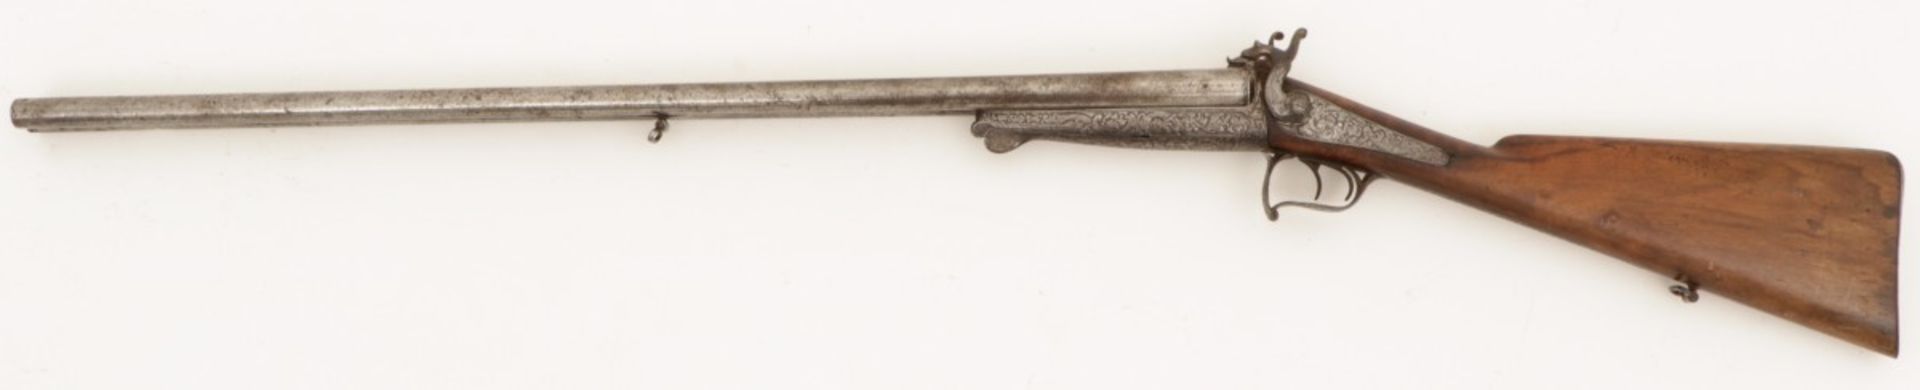 A double barrel percussion hunting rifle, poss. France, 19th century.